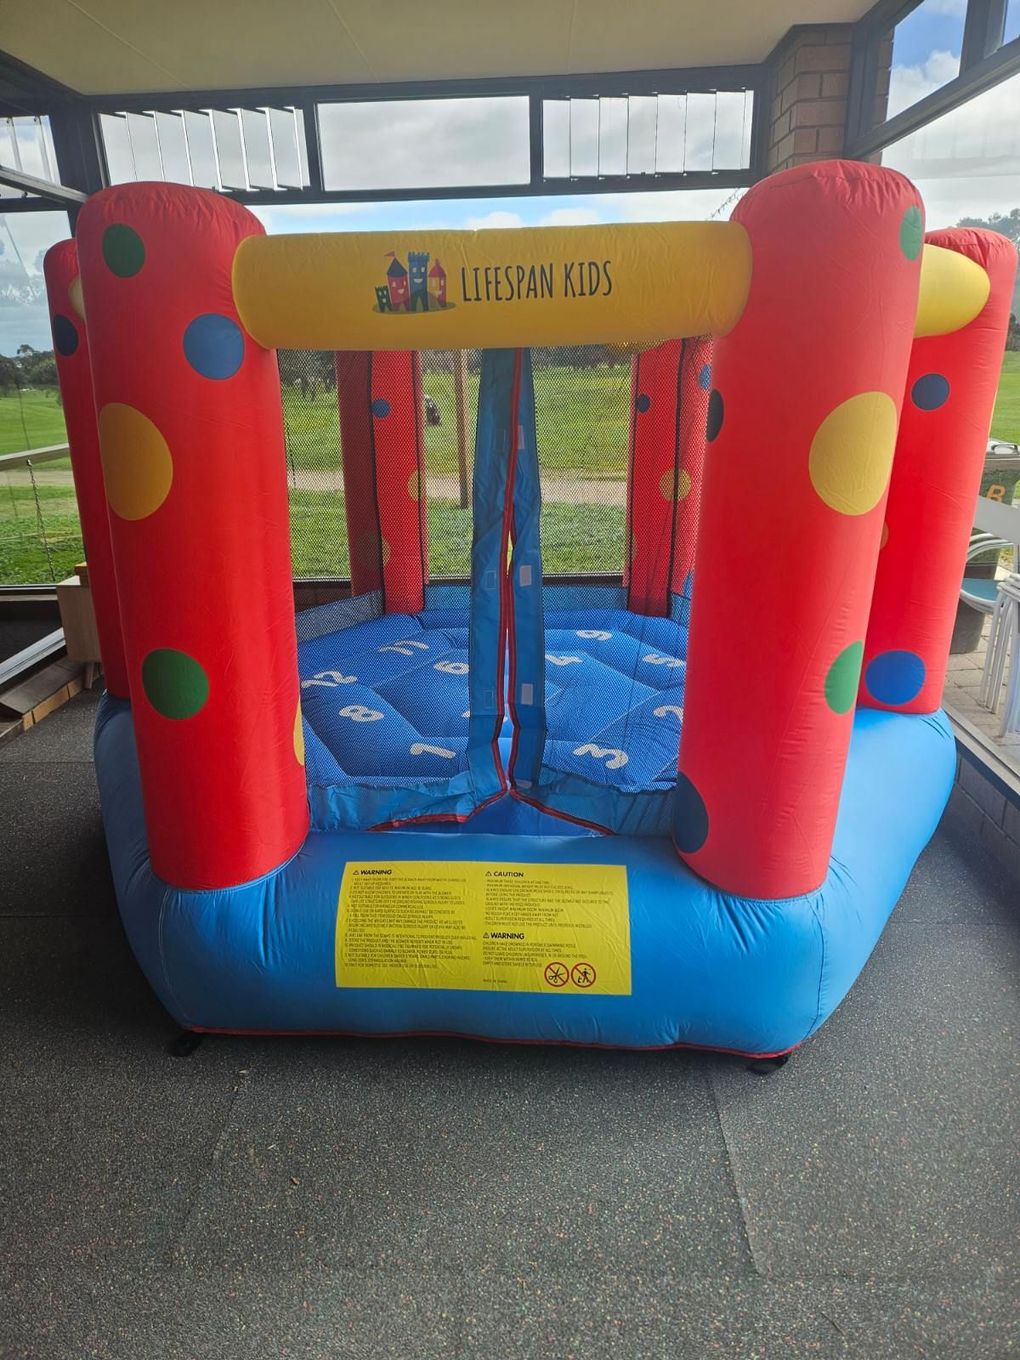 a bouncy house that says lifespan kids on it